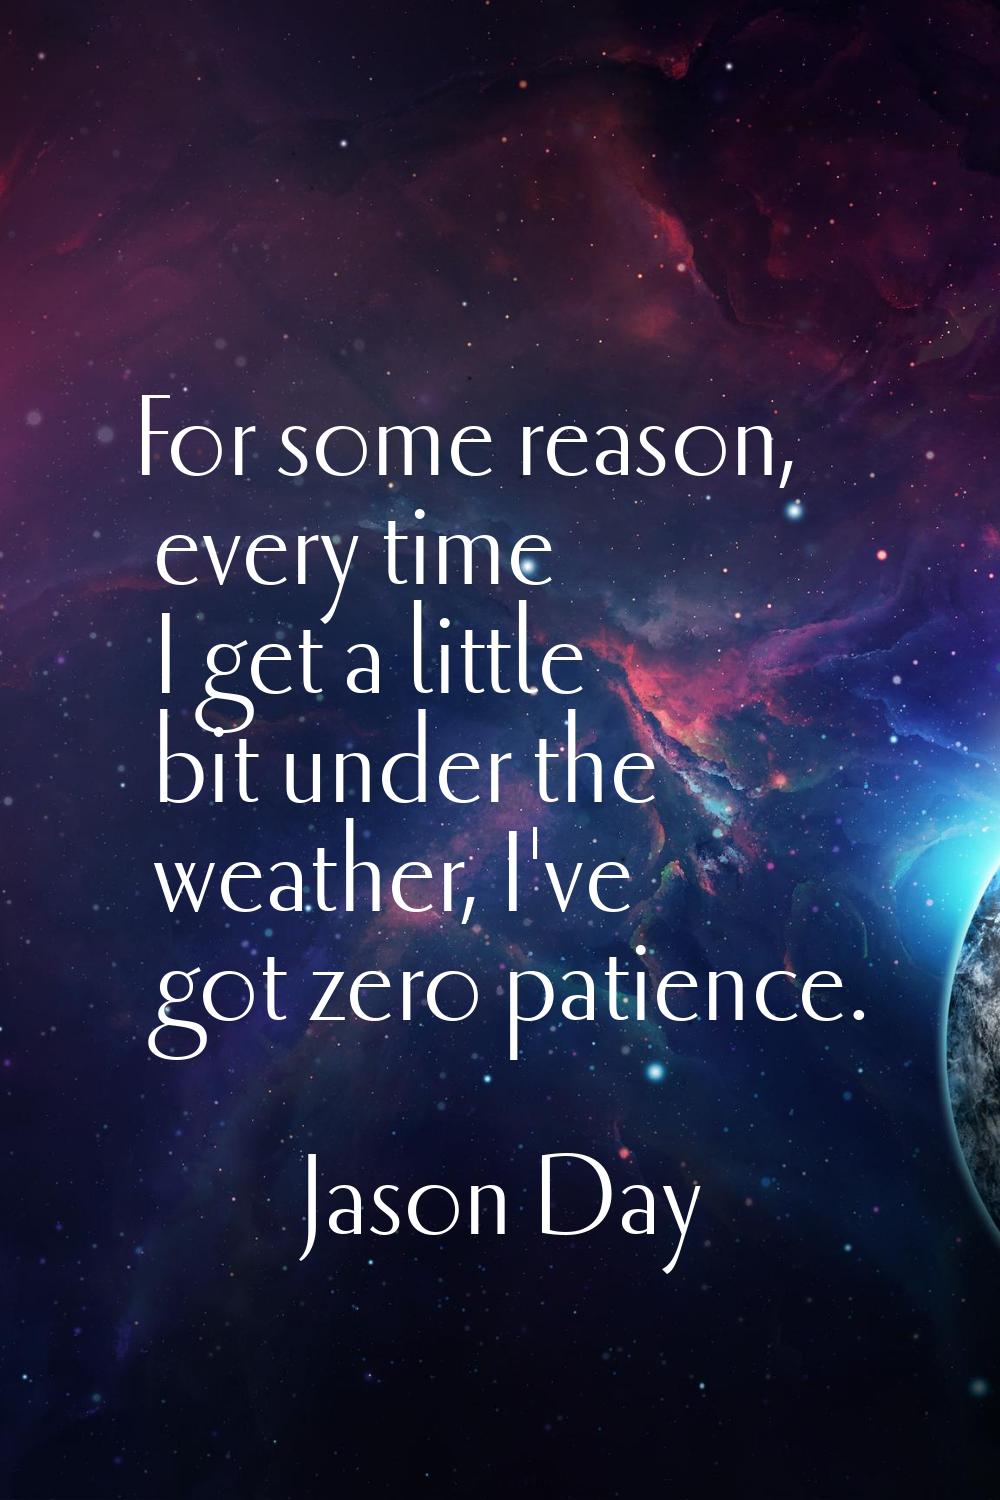 For some reason, every time I get a little bit under the weather, I've got zero patience.